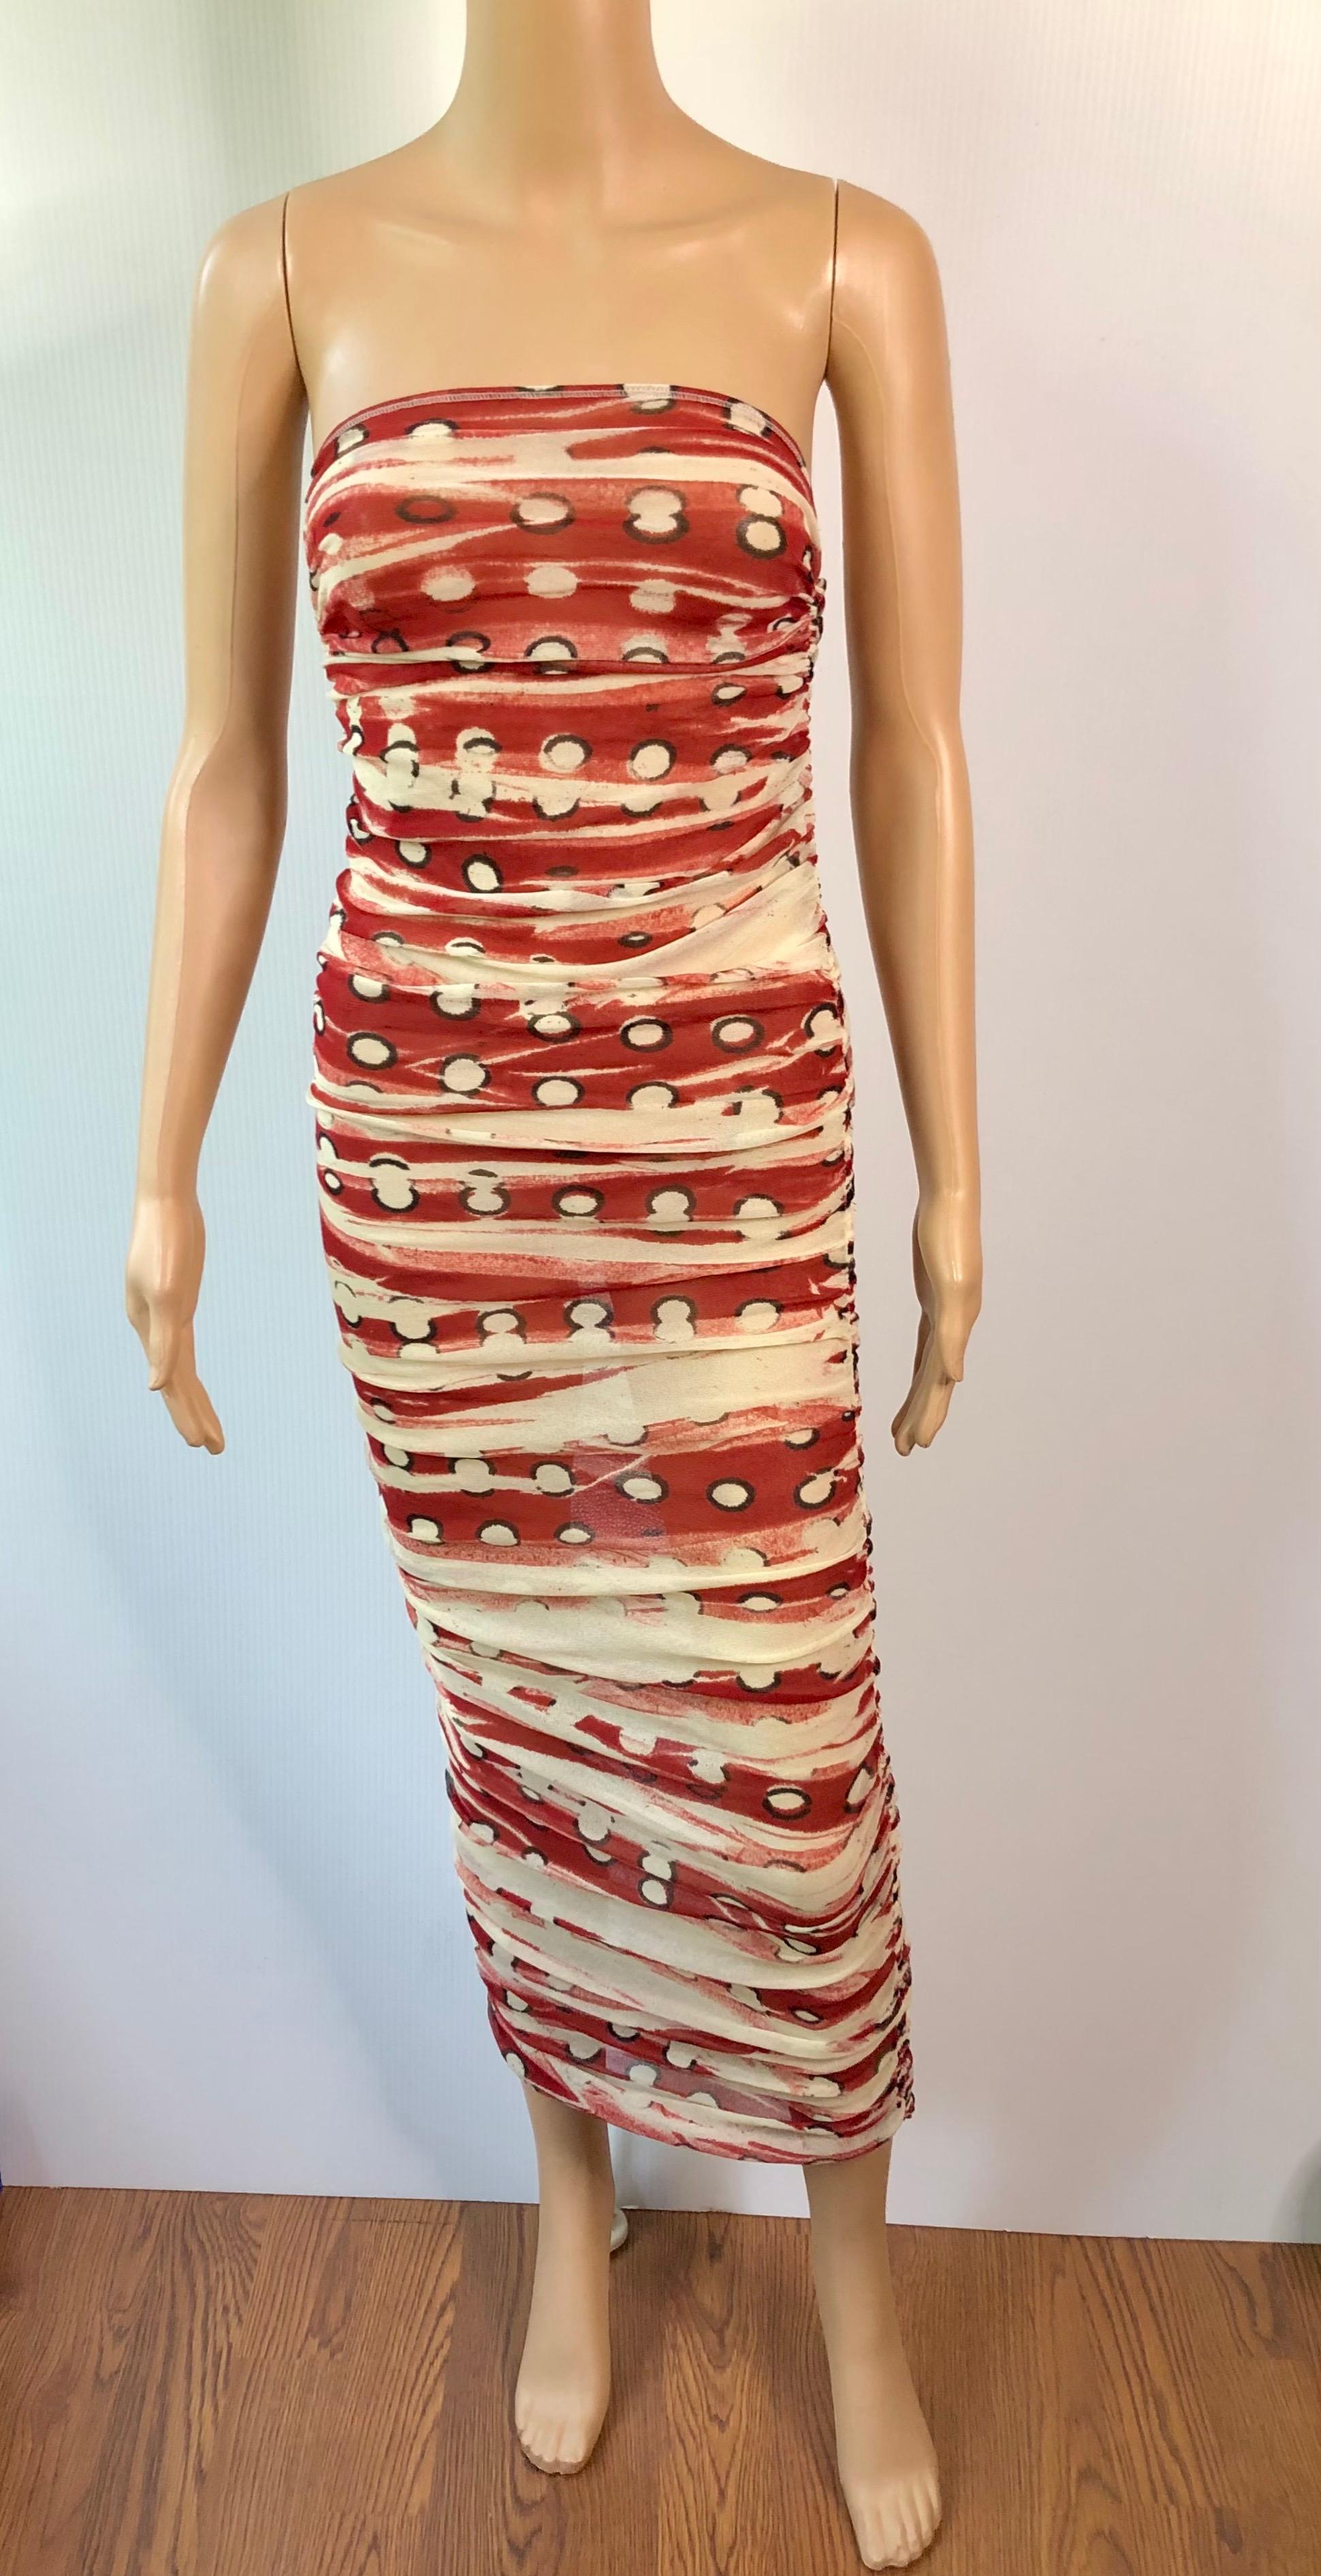 Jean Paul Gaultier Soleil Rushed Semi-Sheer Mesh Maxi Skirt Dress Size S

Please note this piece is very versatile and it could be styled as a strapless dress or a maxi skirt as worn by Kylie Jenner.